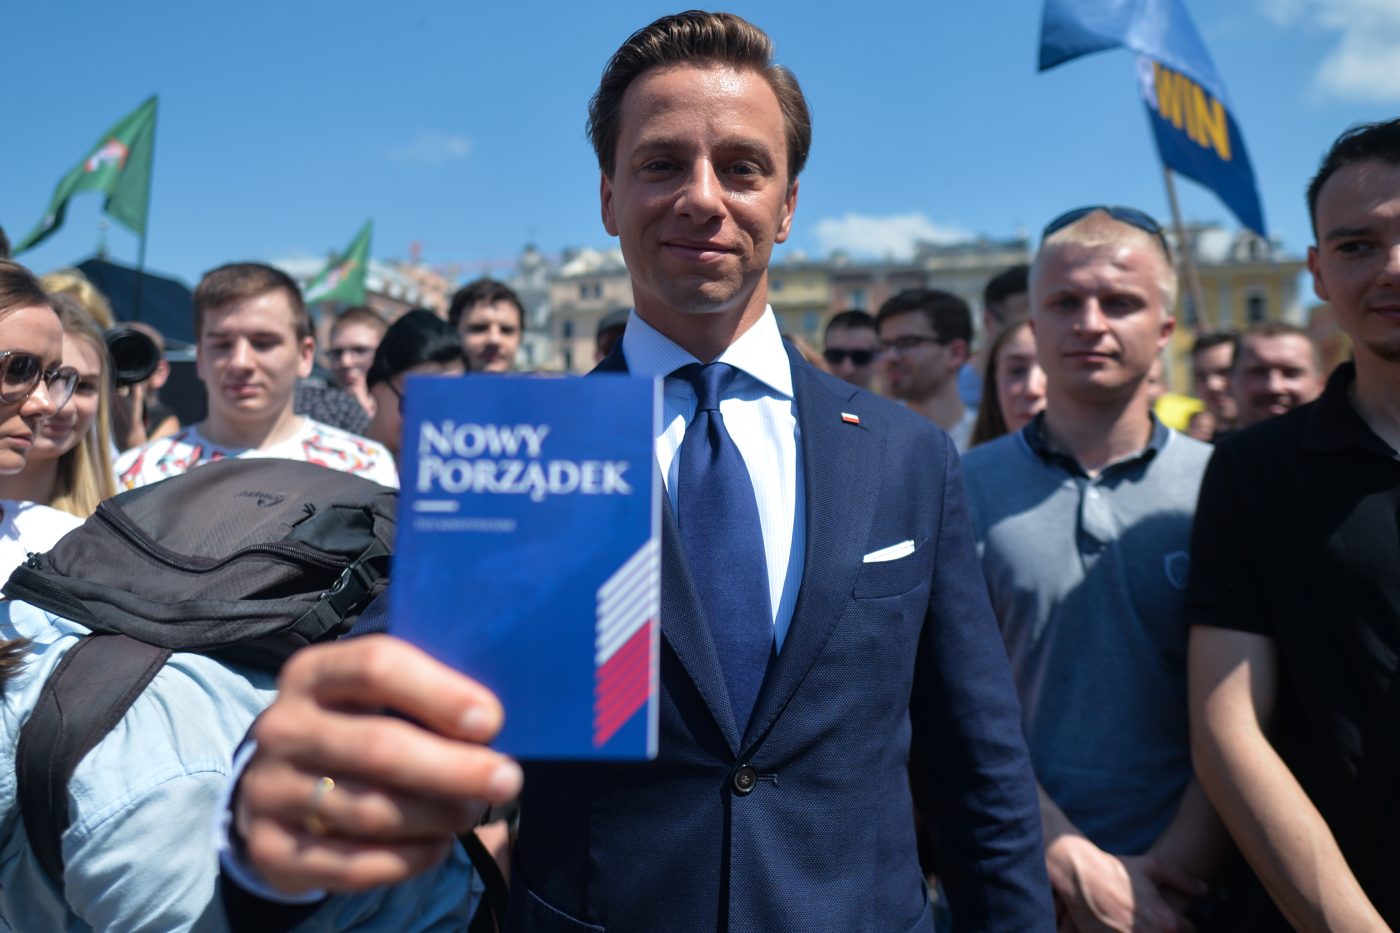 Photo: Krzysztof Bosak, Confederation Liberty and Independence political party candidate for the presidential election 2020, holds a copy of his programme during a Presidential Election Campaign Rally, in Krakow's Main Market Square. On June 13, 2020, in Krakow, Lesser Poland Voivodeship, Poland. Credit: Artur Widak/NurPhoto